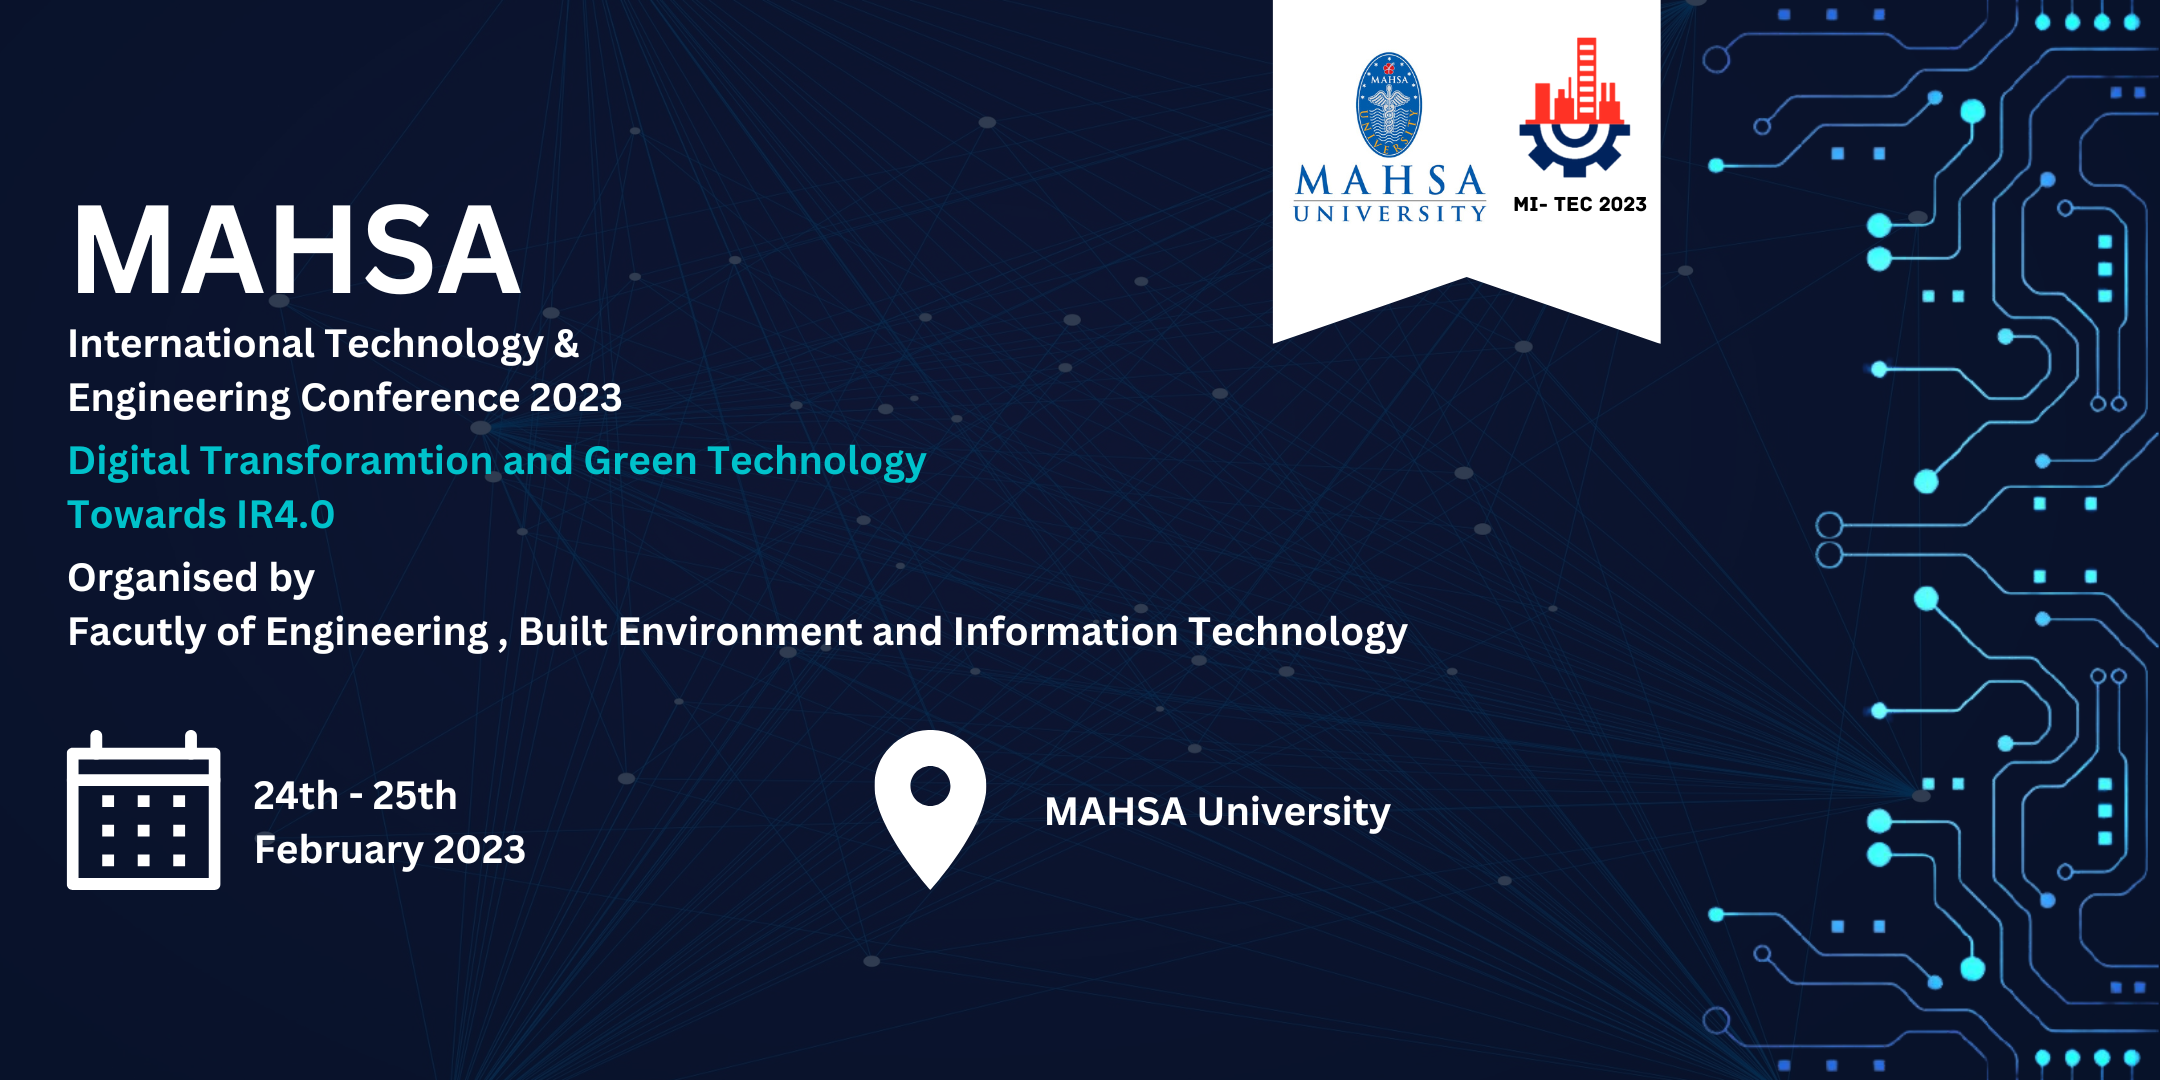 MAHSA International Technology & Engineering Conference 2023, Online Event